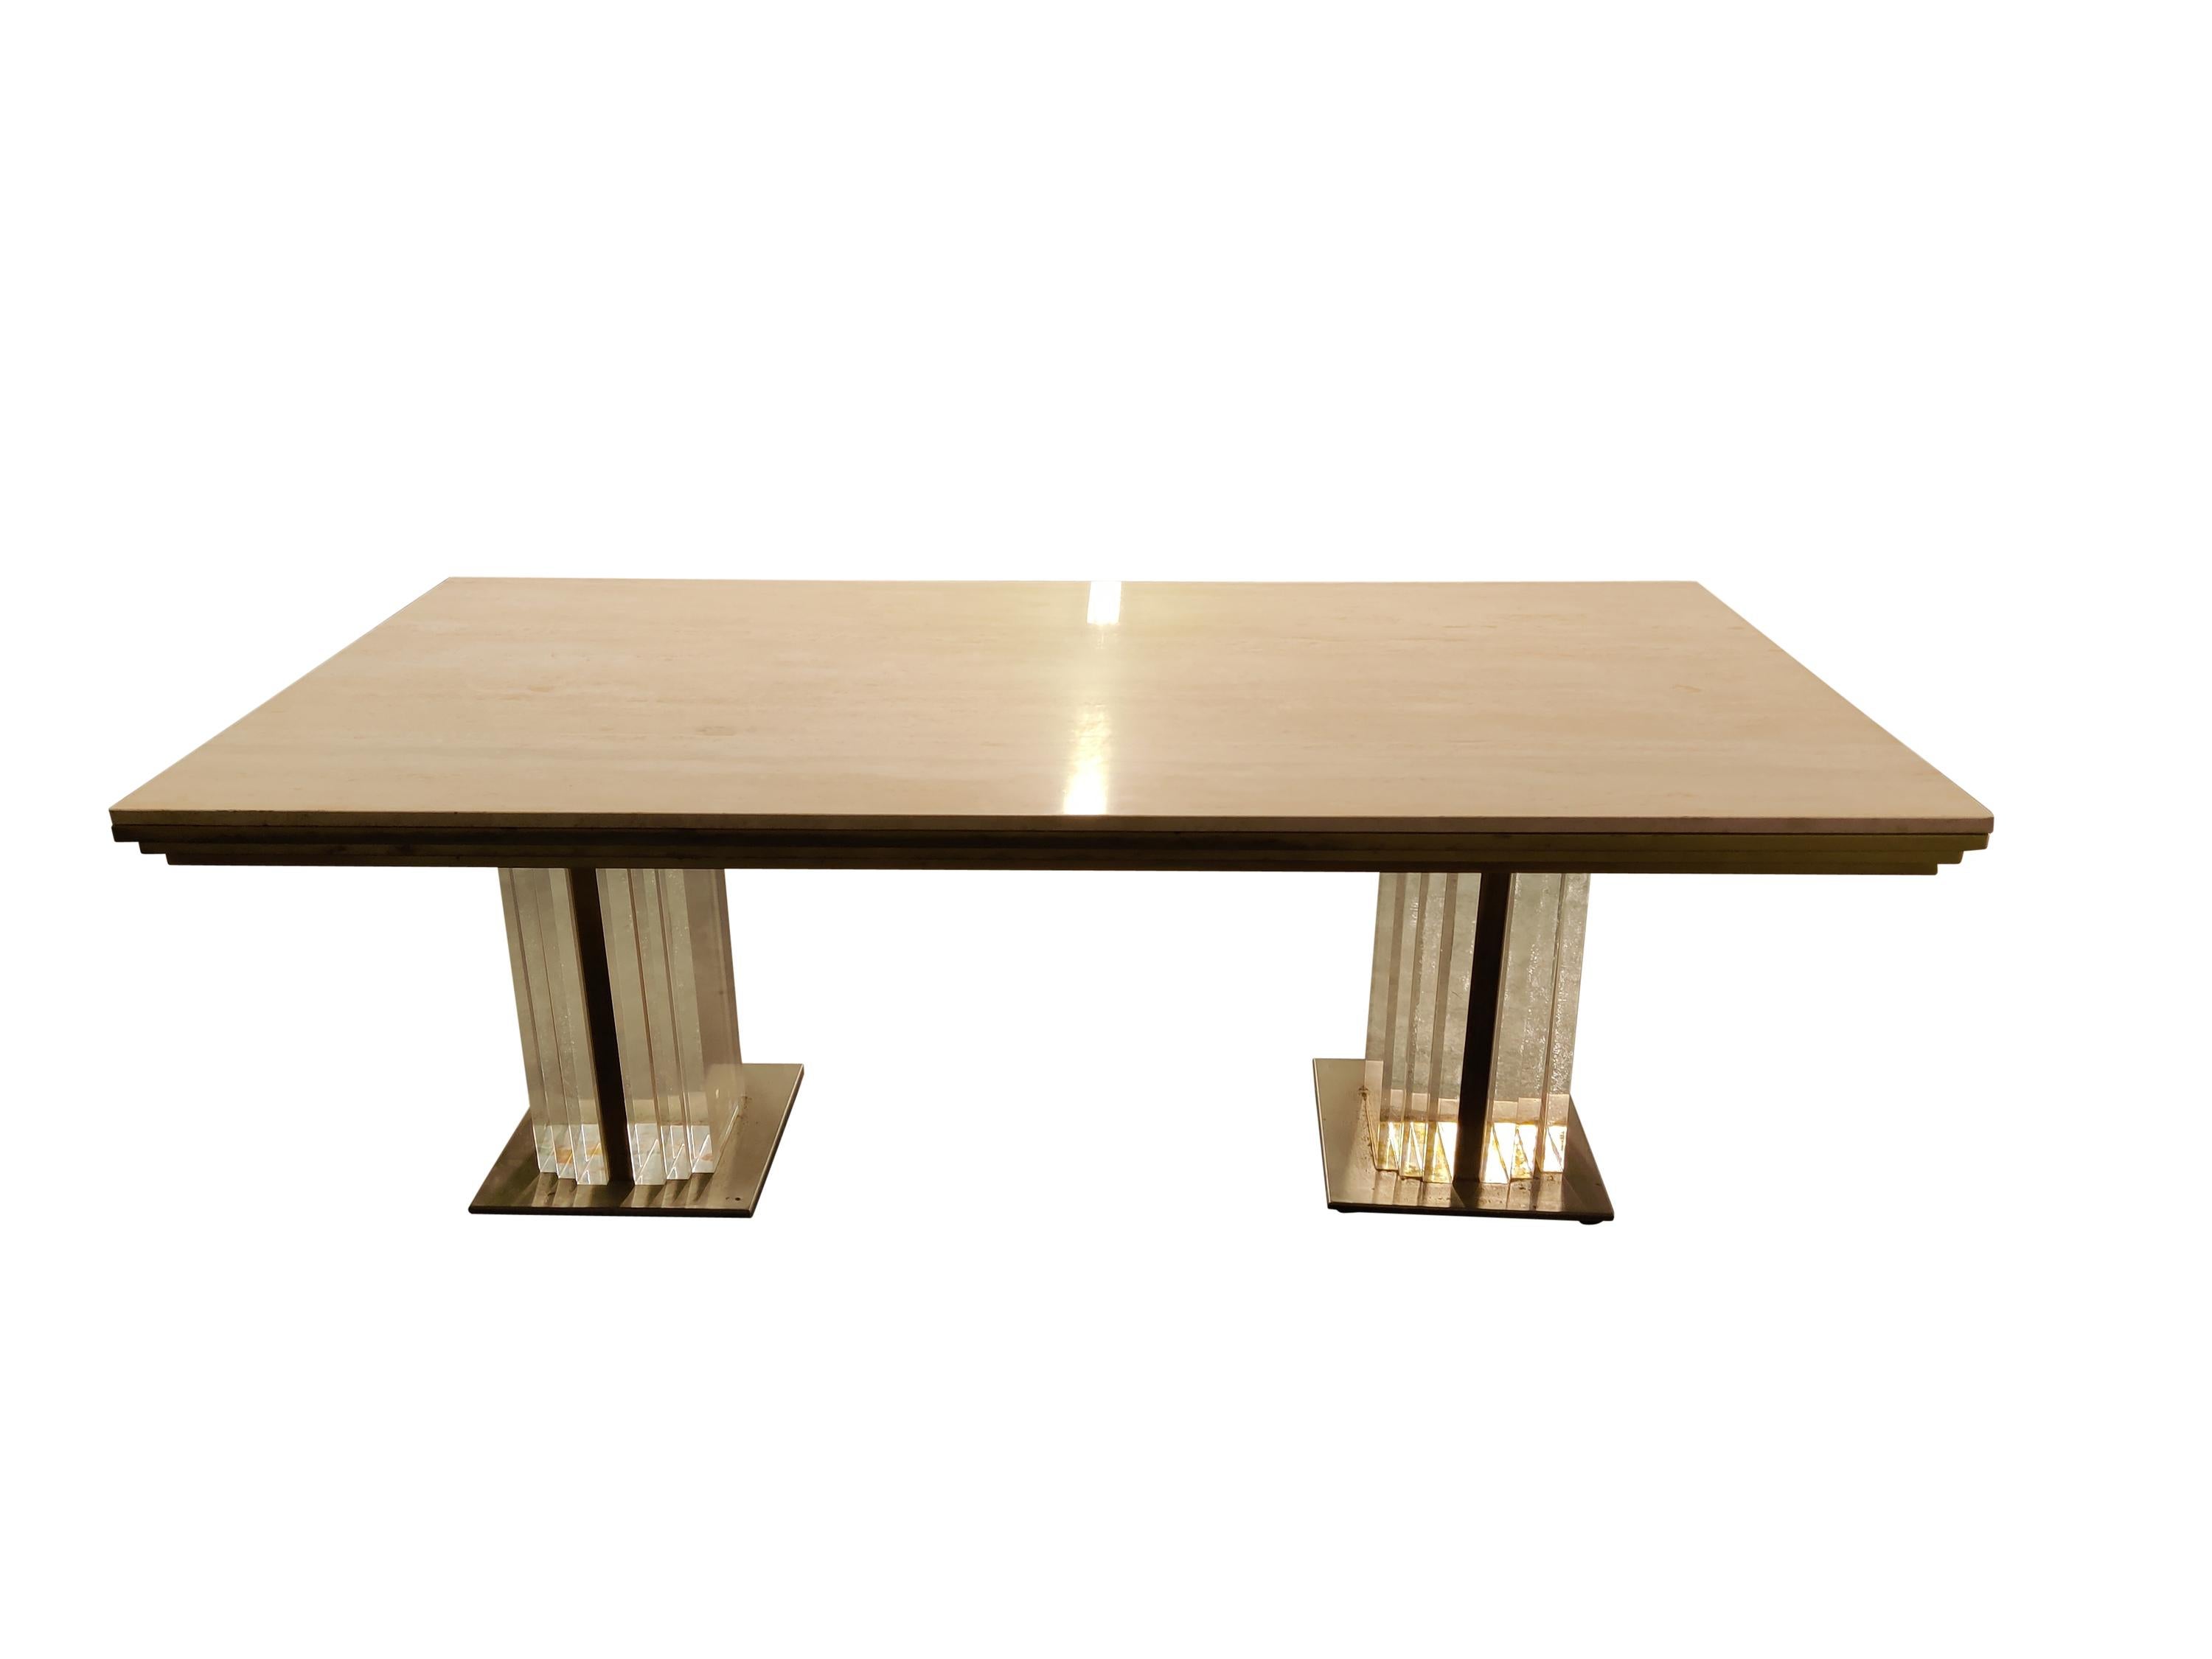 Vintage Lucite, Brass and Travertine Dining Table, 1970s For Sale 1